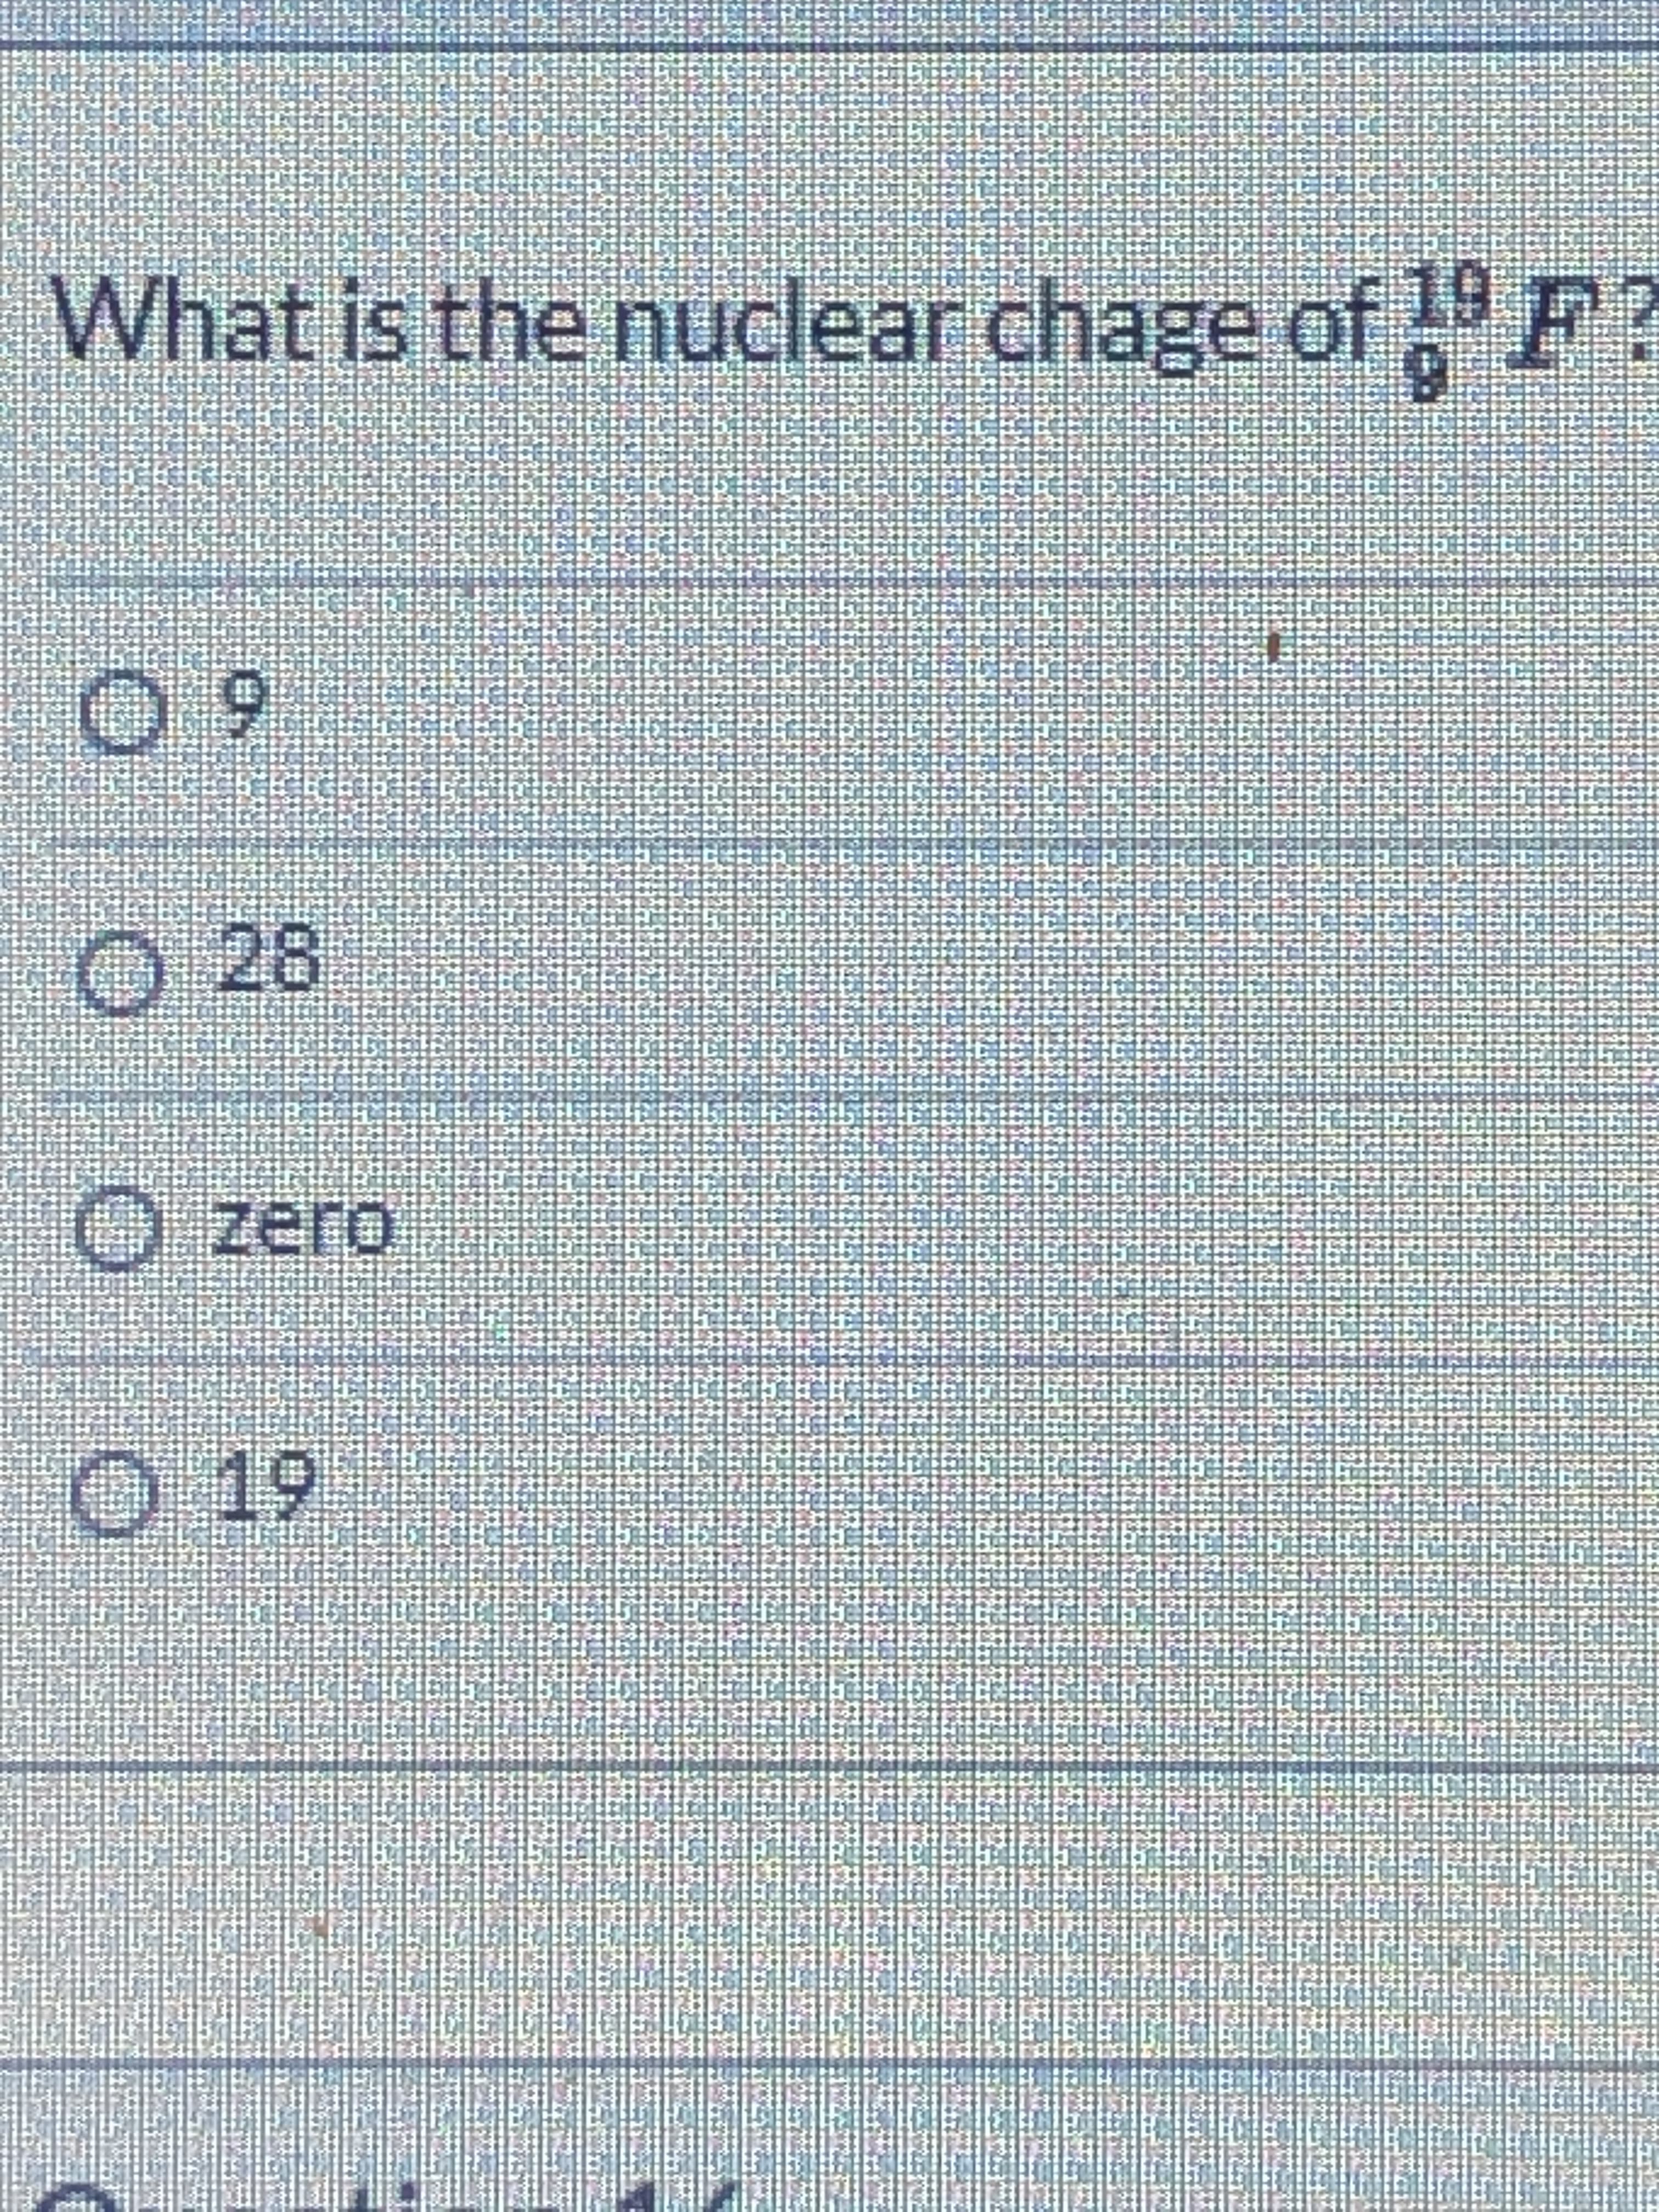 What is the nuclear chage ofF
69
